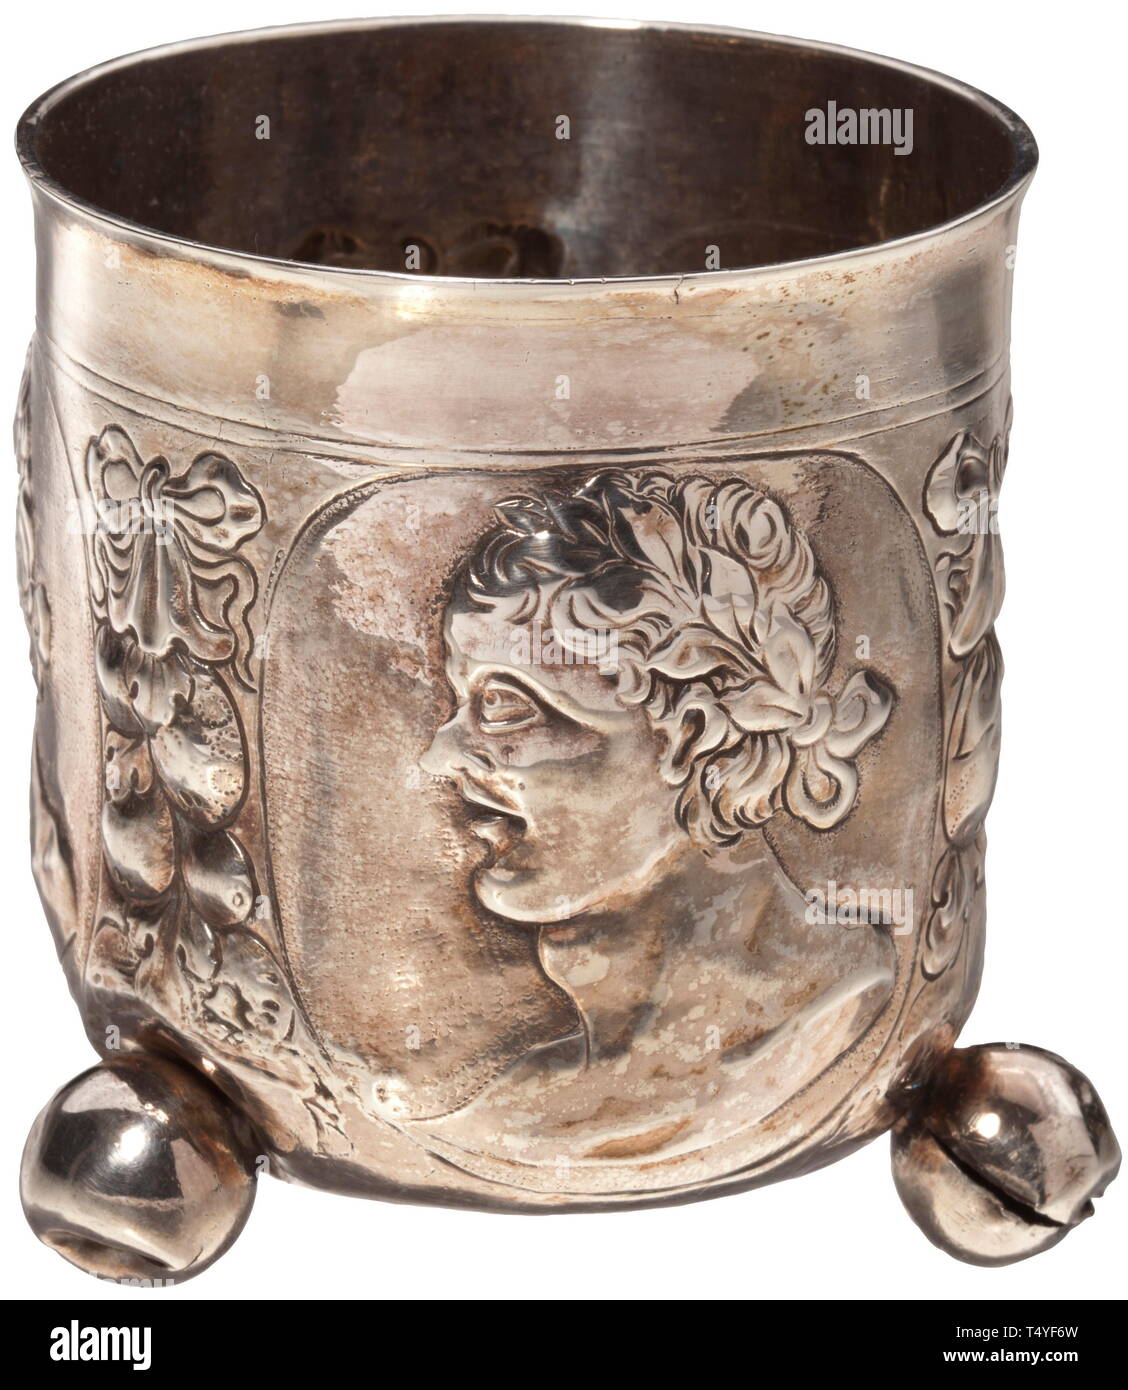 A Nuremberg silver goblet with ball feet Circa 1700. Cylindrical goblet on three ball feet. Slightly reinforced lip, the exterior with three antique-style portrait heads amid fruit festoons. The ball feet partially damaged, two with old repairs. Assayer´s mark on the bottom, Nuremberg city mark and master´s mark 'CW' with star. Beside it engraved owner´s monograms 'RHS' and 'RCL' with date '1700'. Height 8.5 cm, weight 82 g. Considerably improvable by restoration. historic, historical, handicrafts, handcraft, craft, object, objects, stills, clipp, Additional-Rights-Clearance-Info-Not-Available Stock Photo